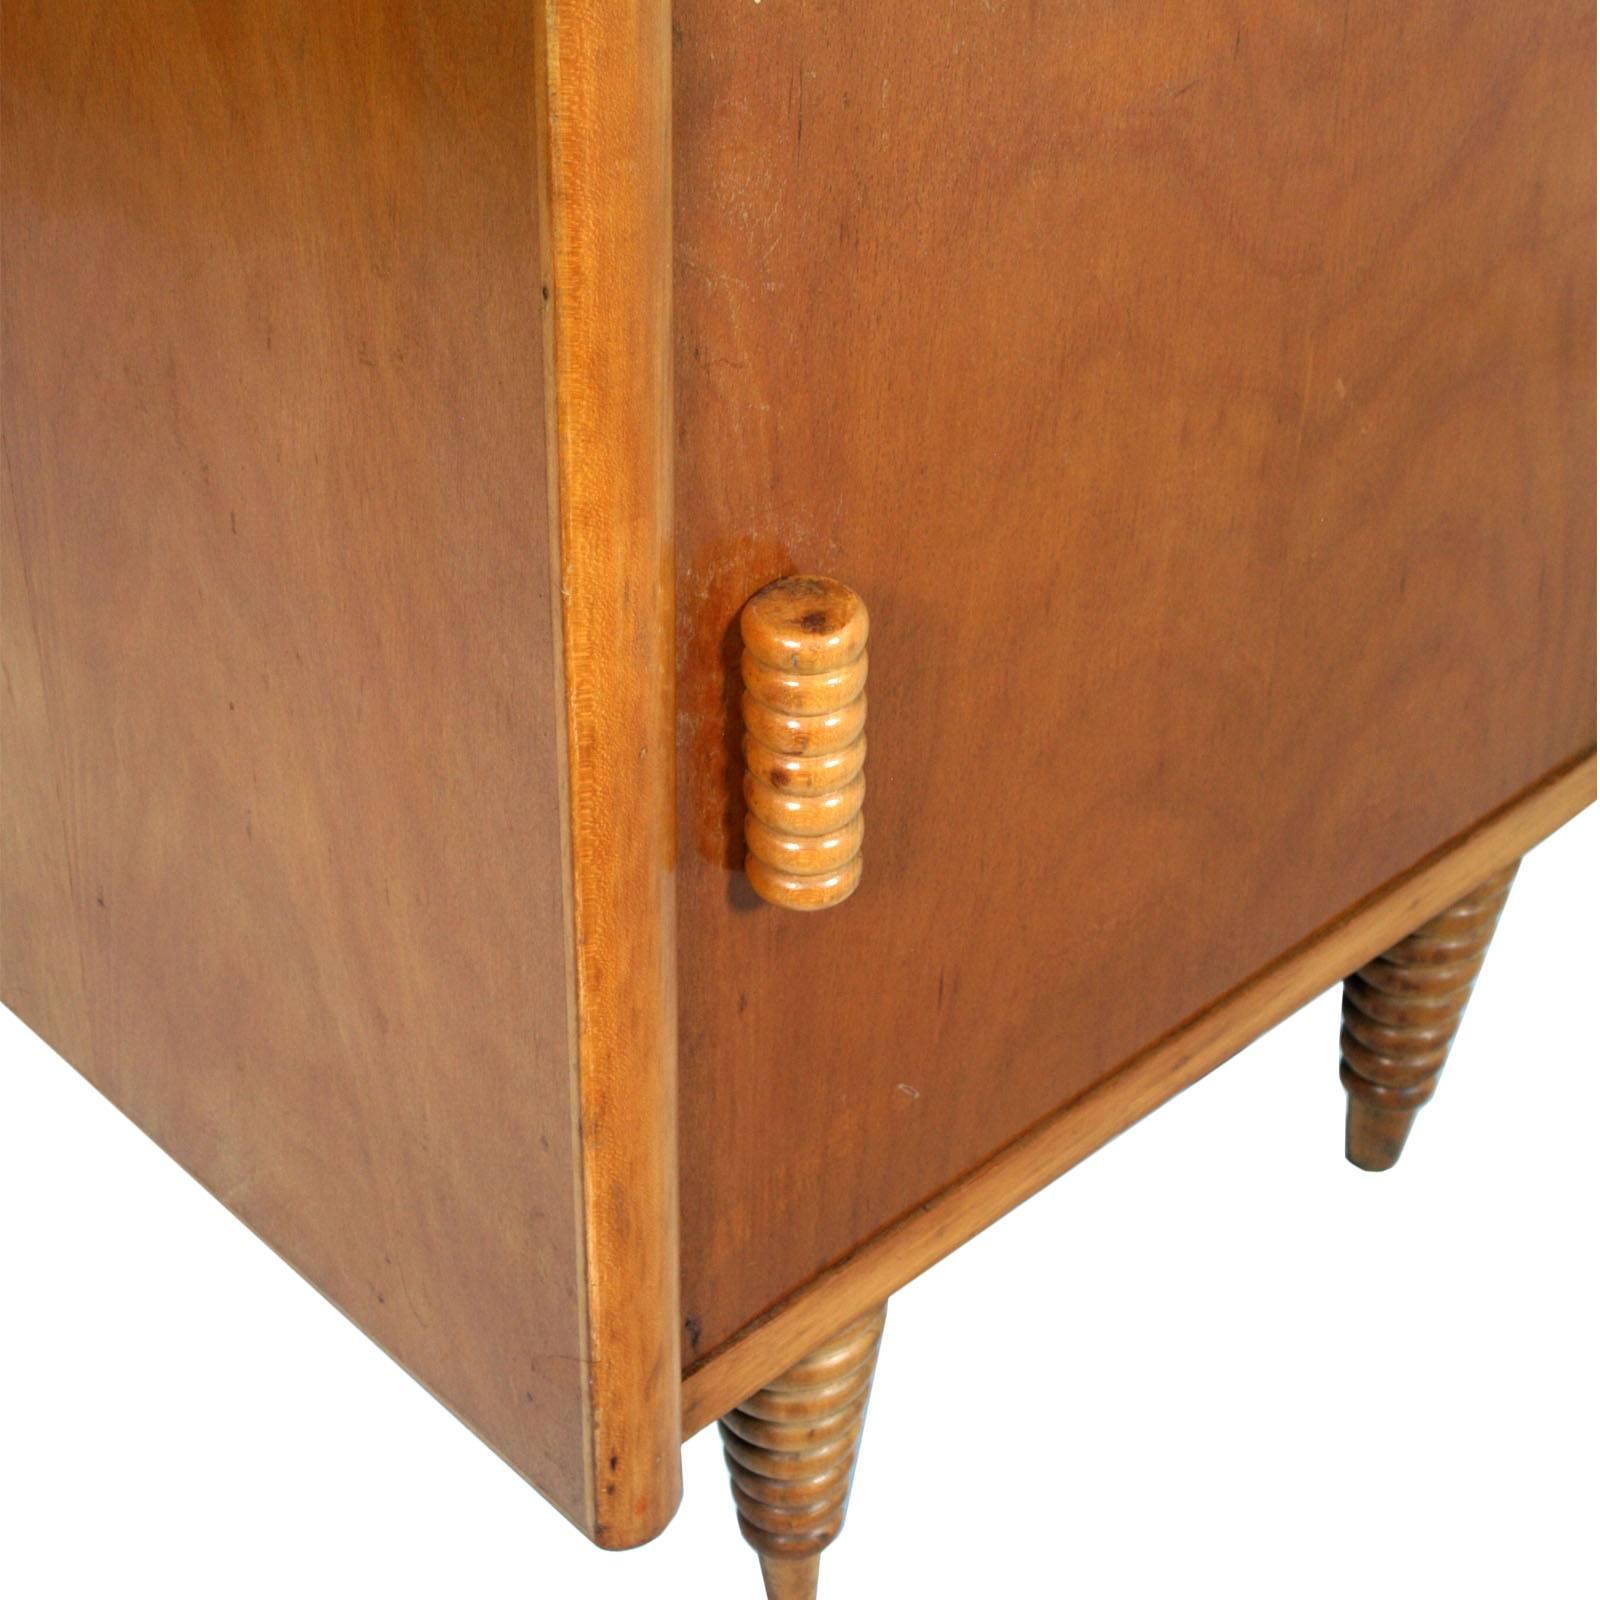 Italian circa 1930s Art Deco nightstand, Consorzio Esposizione Mobili Cantu, Gio Ponti attributed, in blond walnut and turned beech, polished to wax
Measures cm: H54\62, W 45, D 35.

About this Gio Ponti's cabinet

This Ponti cabinet expresses all